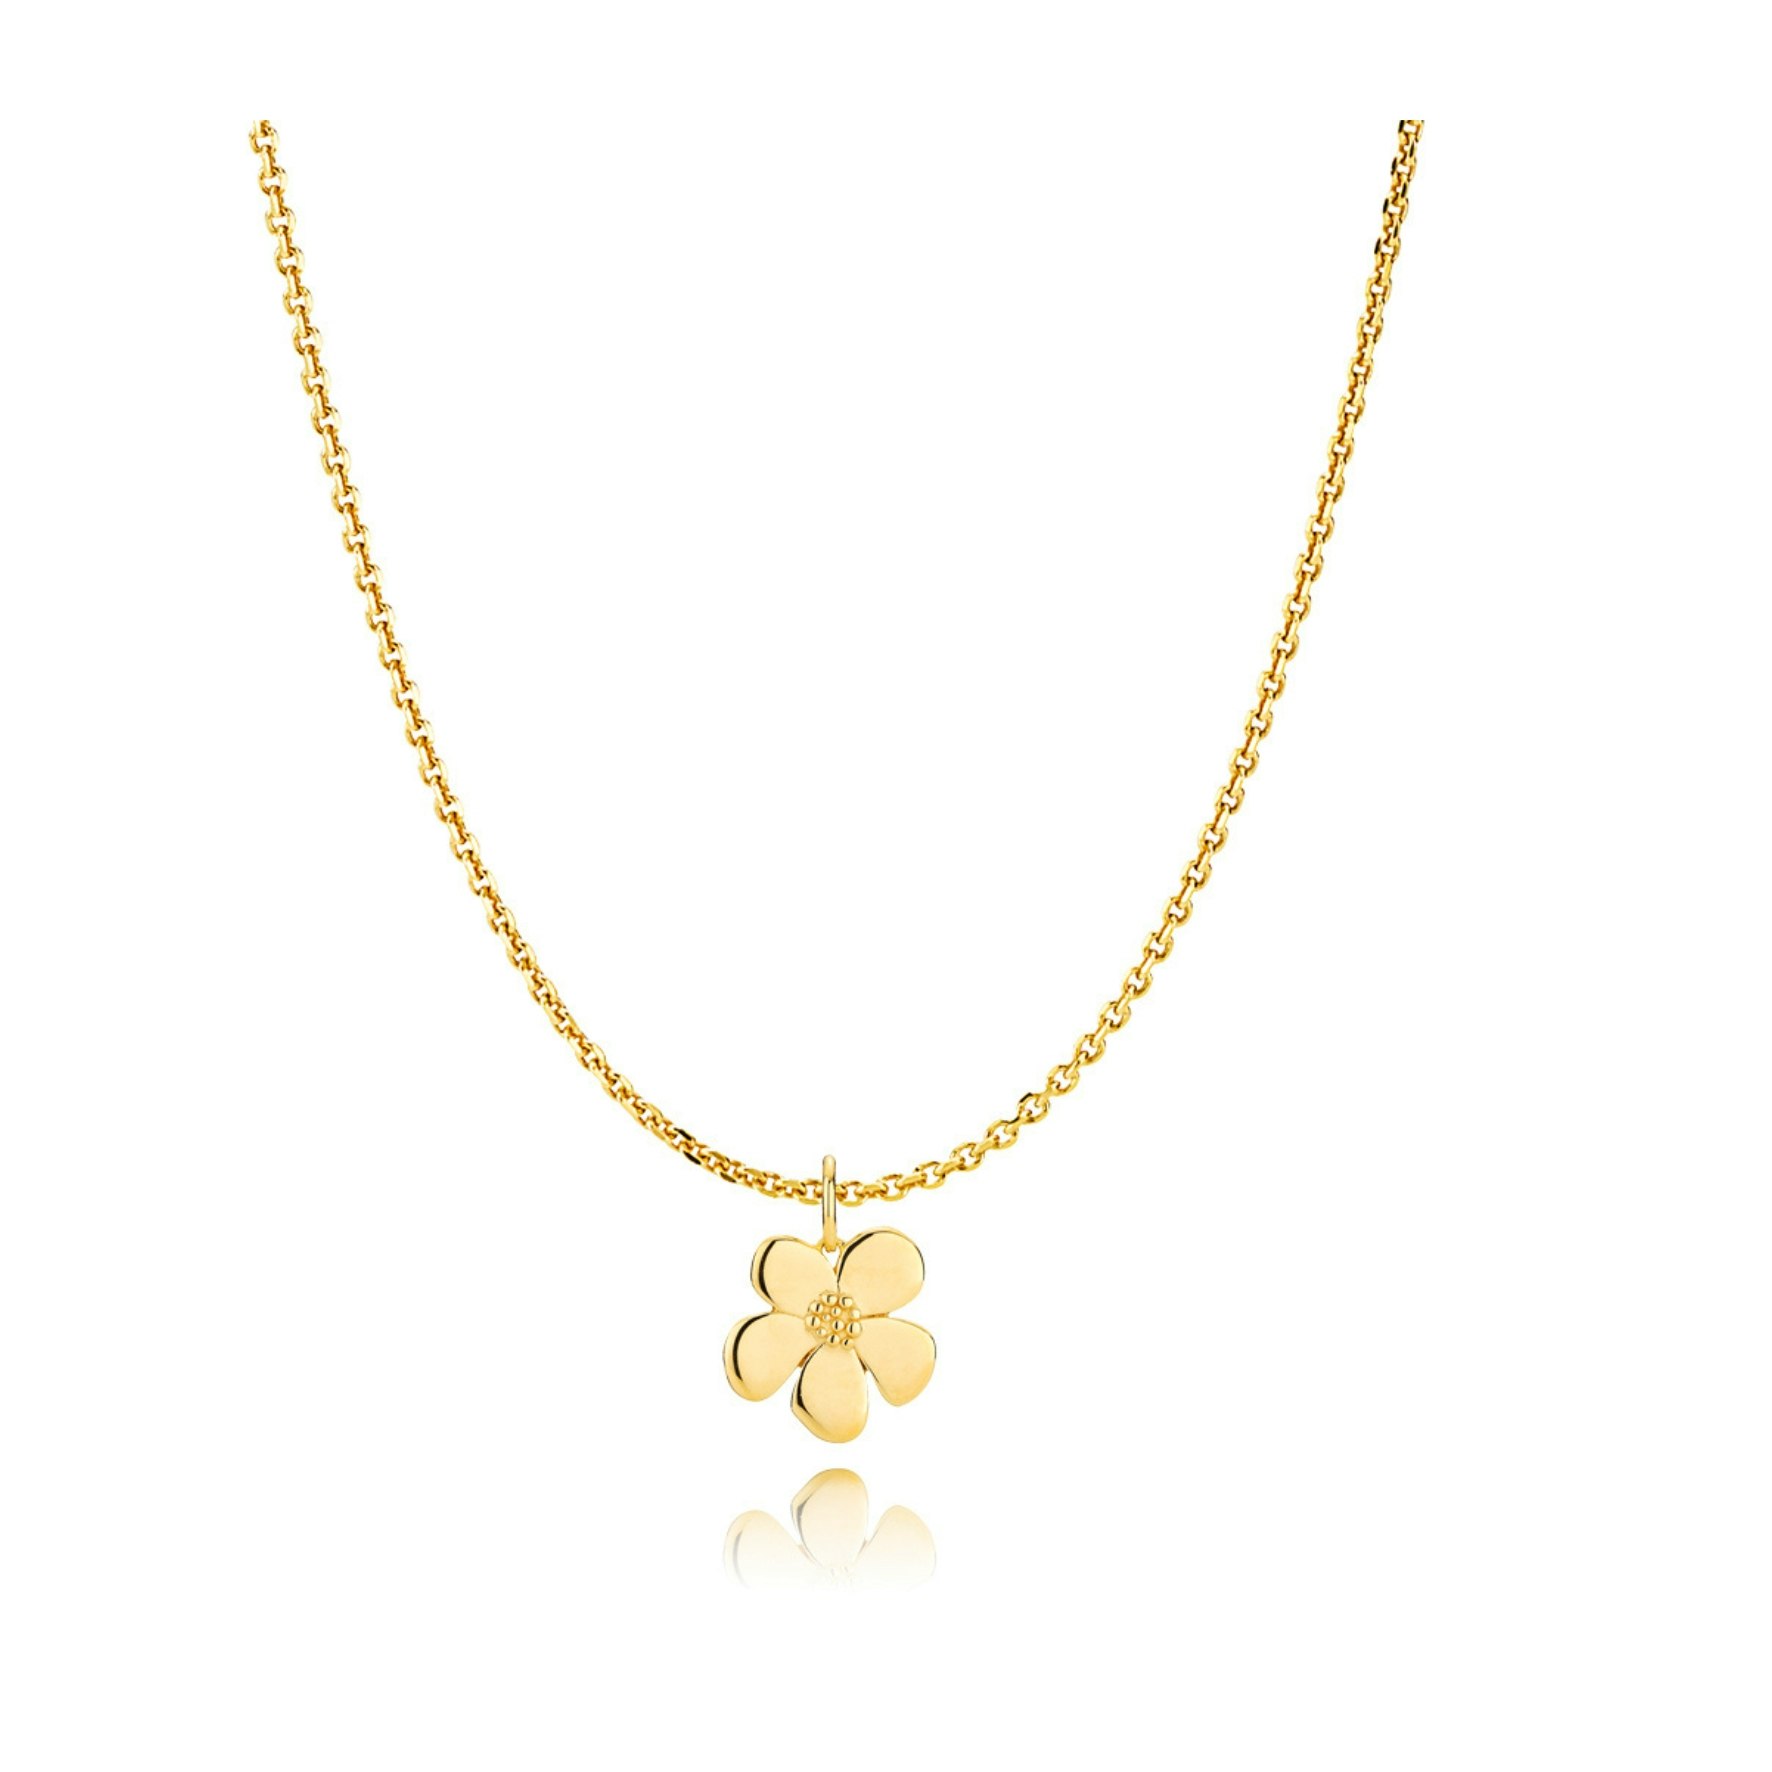 Pansy Necklace from Izabel Camille in Goldplated Silver Sterling 925